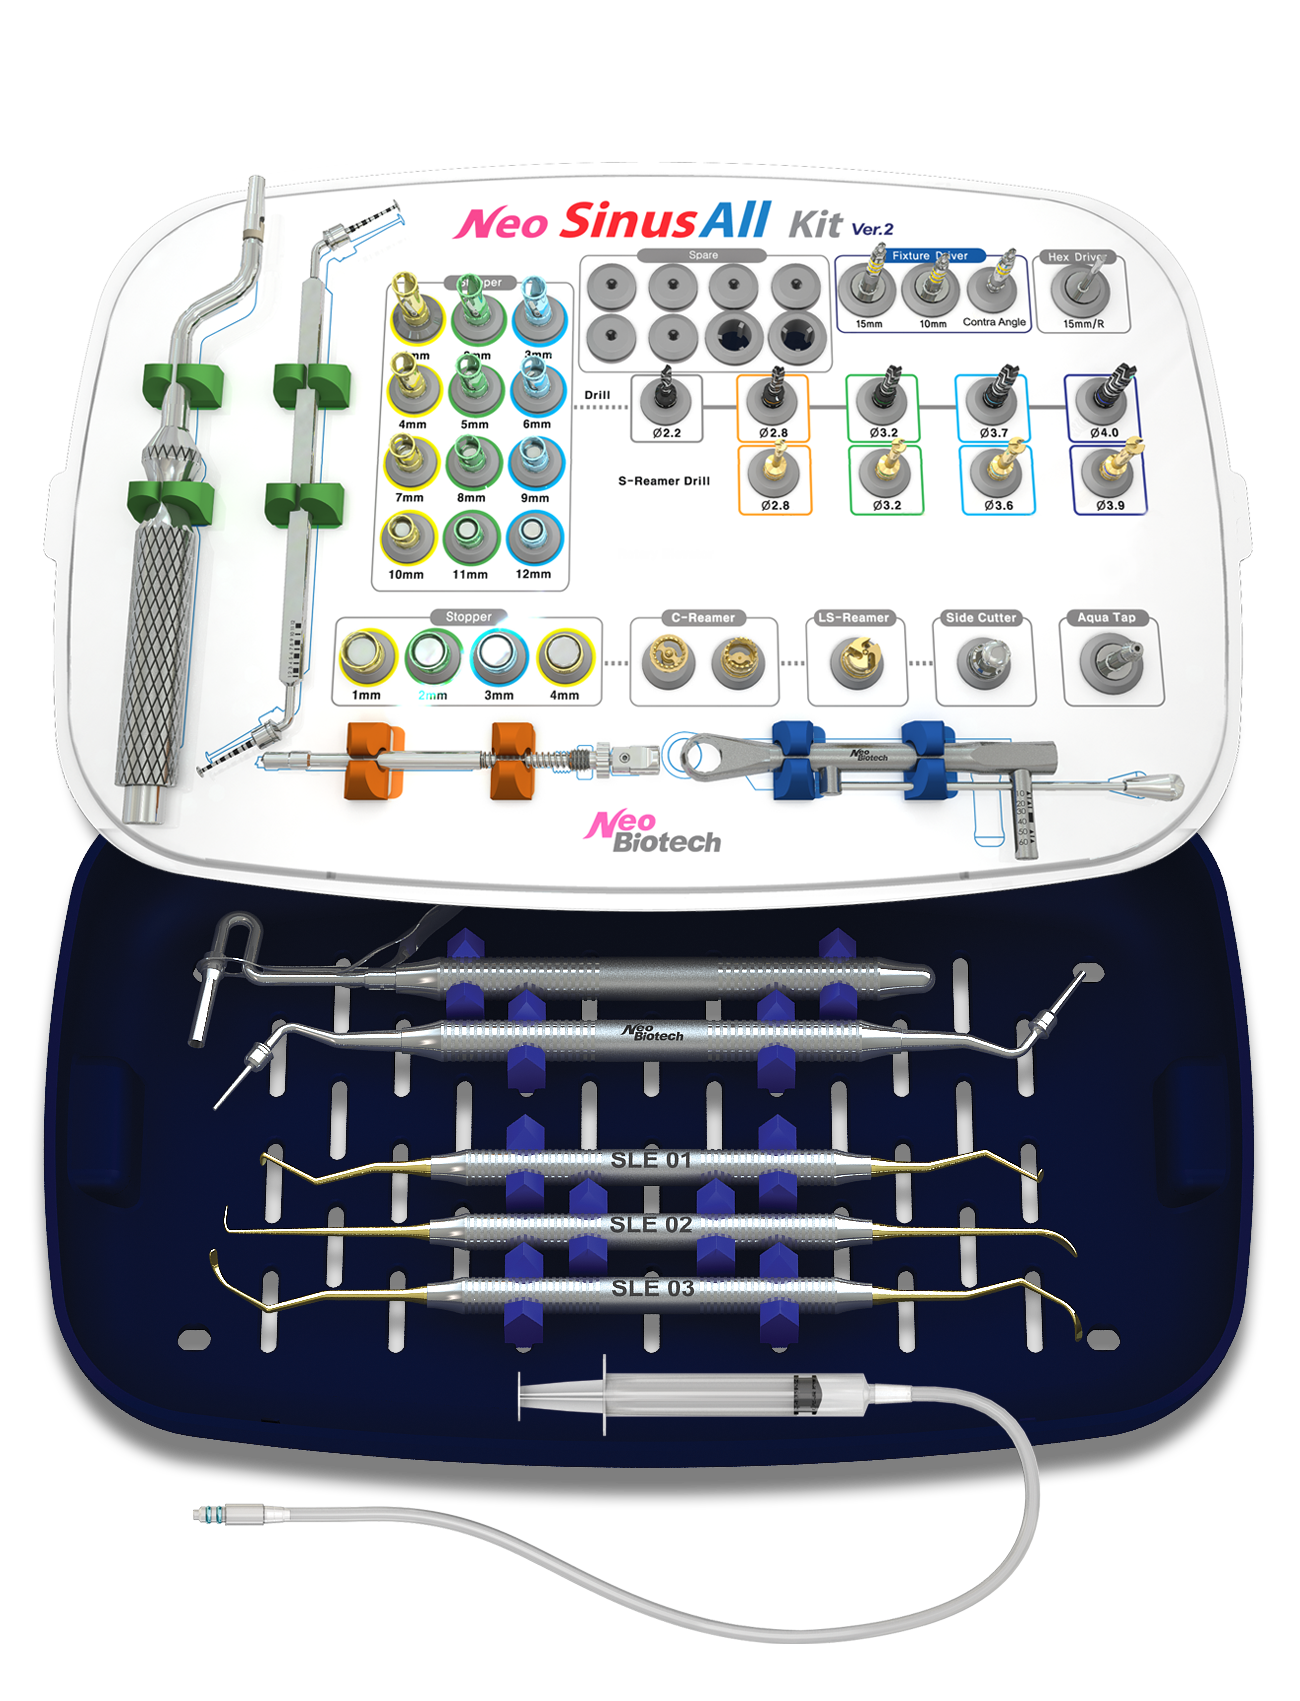 SinusAll Kit by Neo Implant